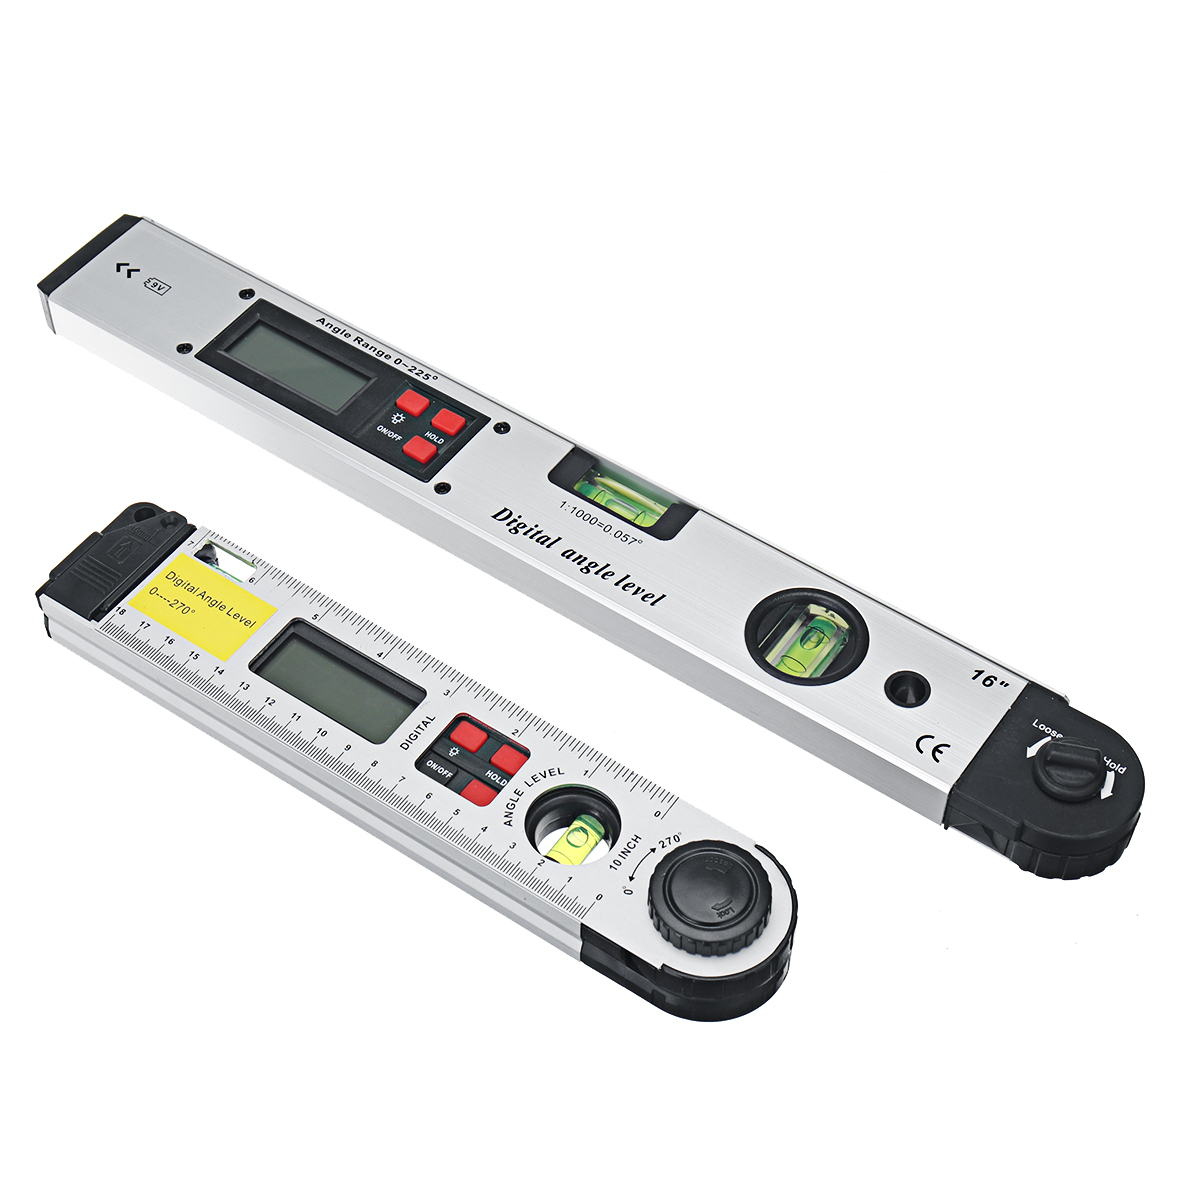 250400mm-Digital-Angle-Level-Meter-LCD-Display-0-225-Degree-for-Measuring-Roof-Angles-Fitting-Up-Win-1740234-4